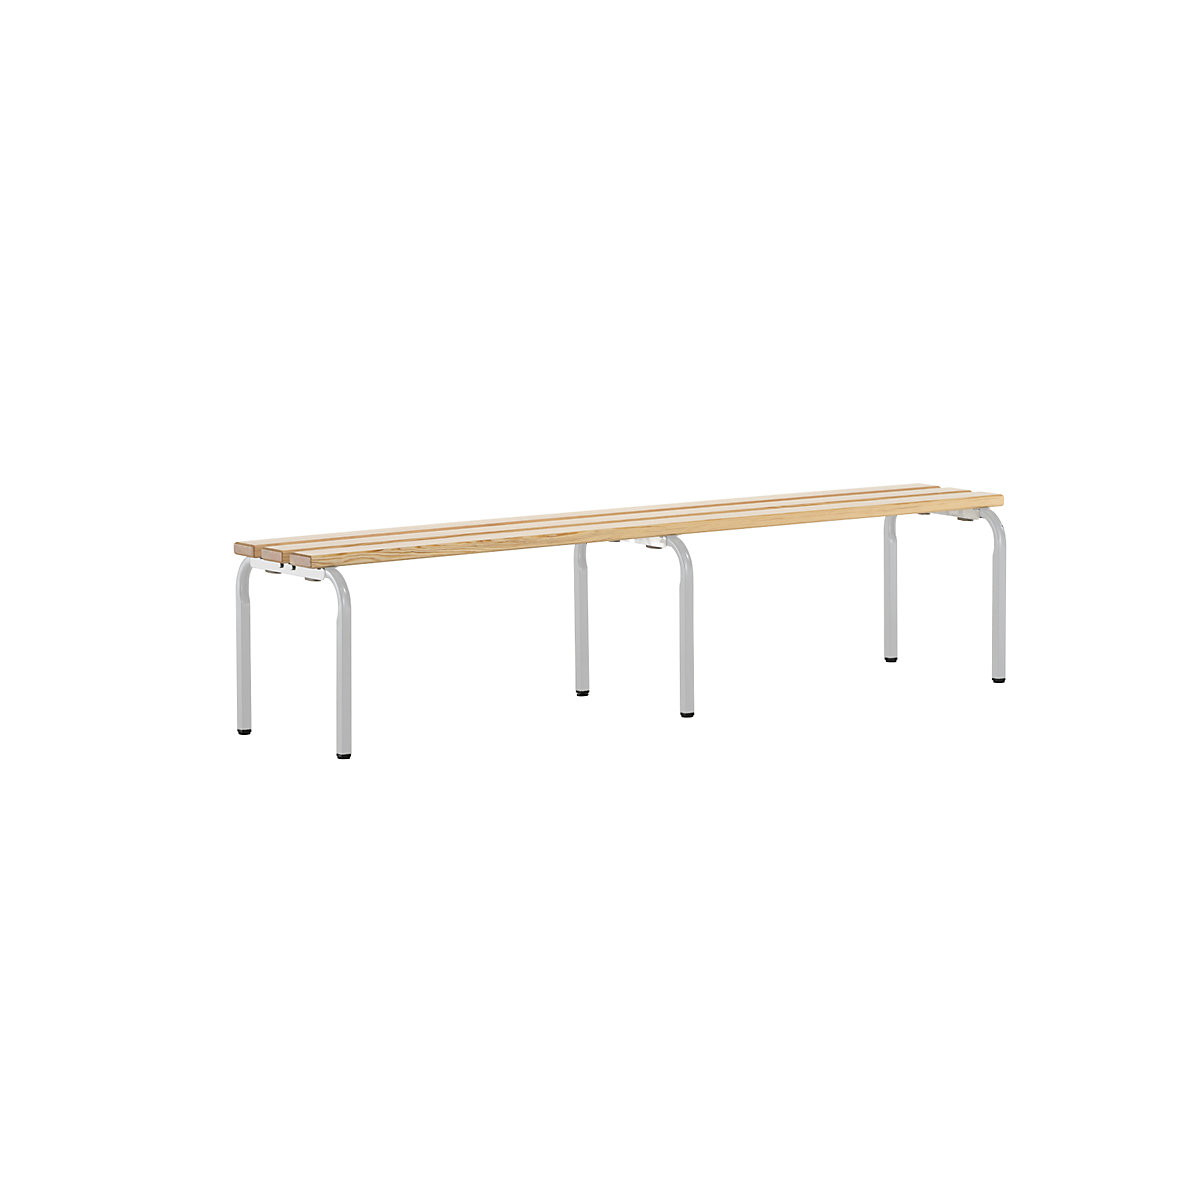 Sypro – Cloakroom bench, stackable